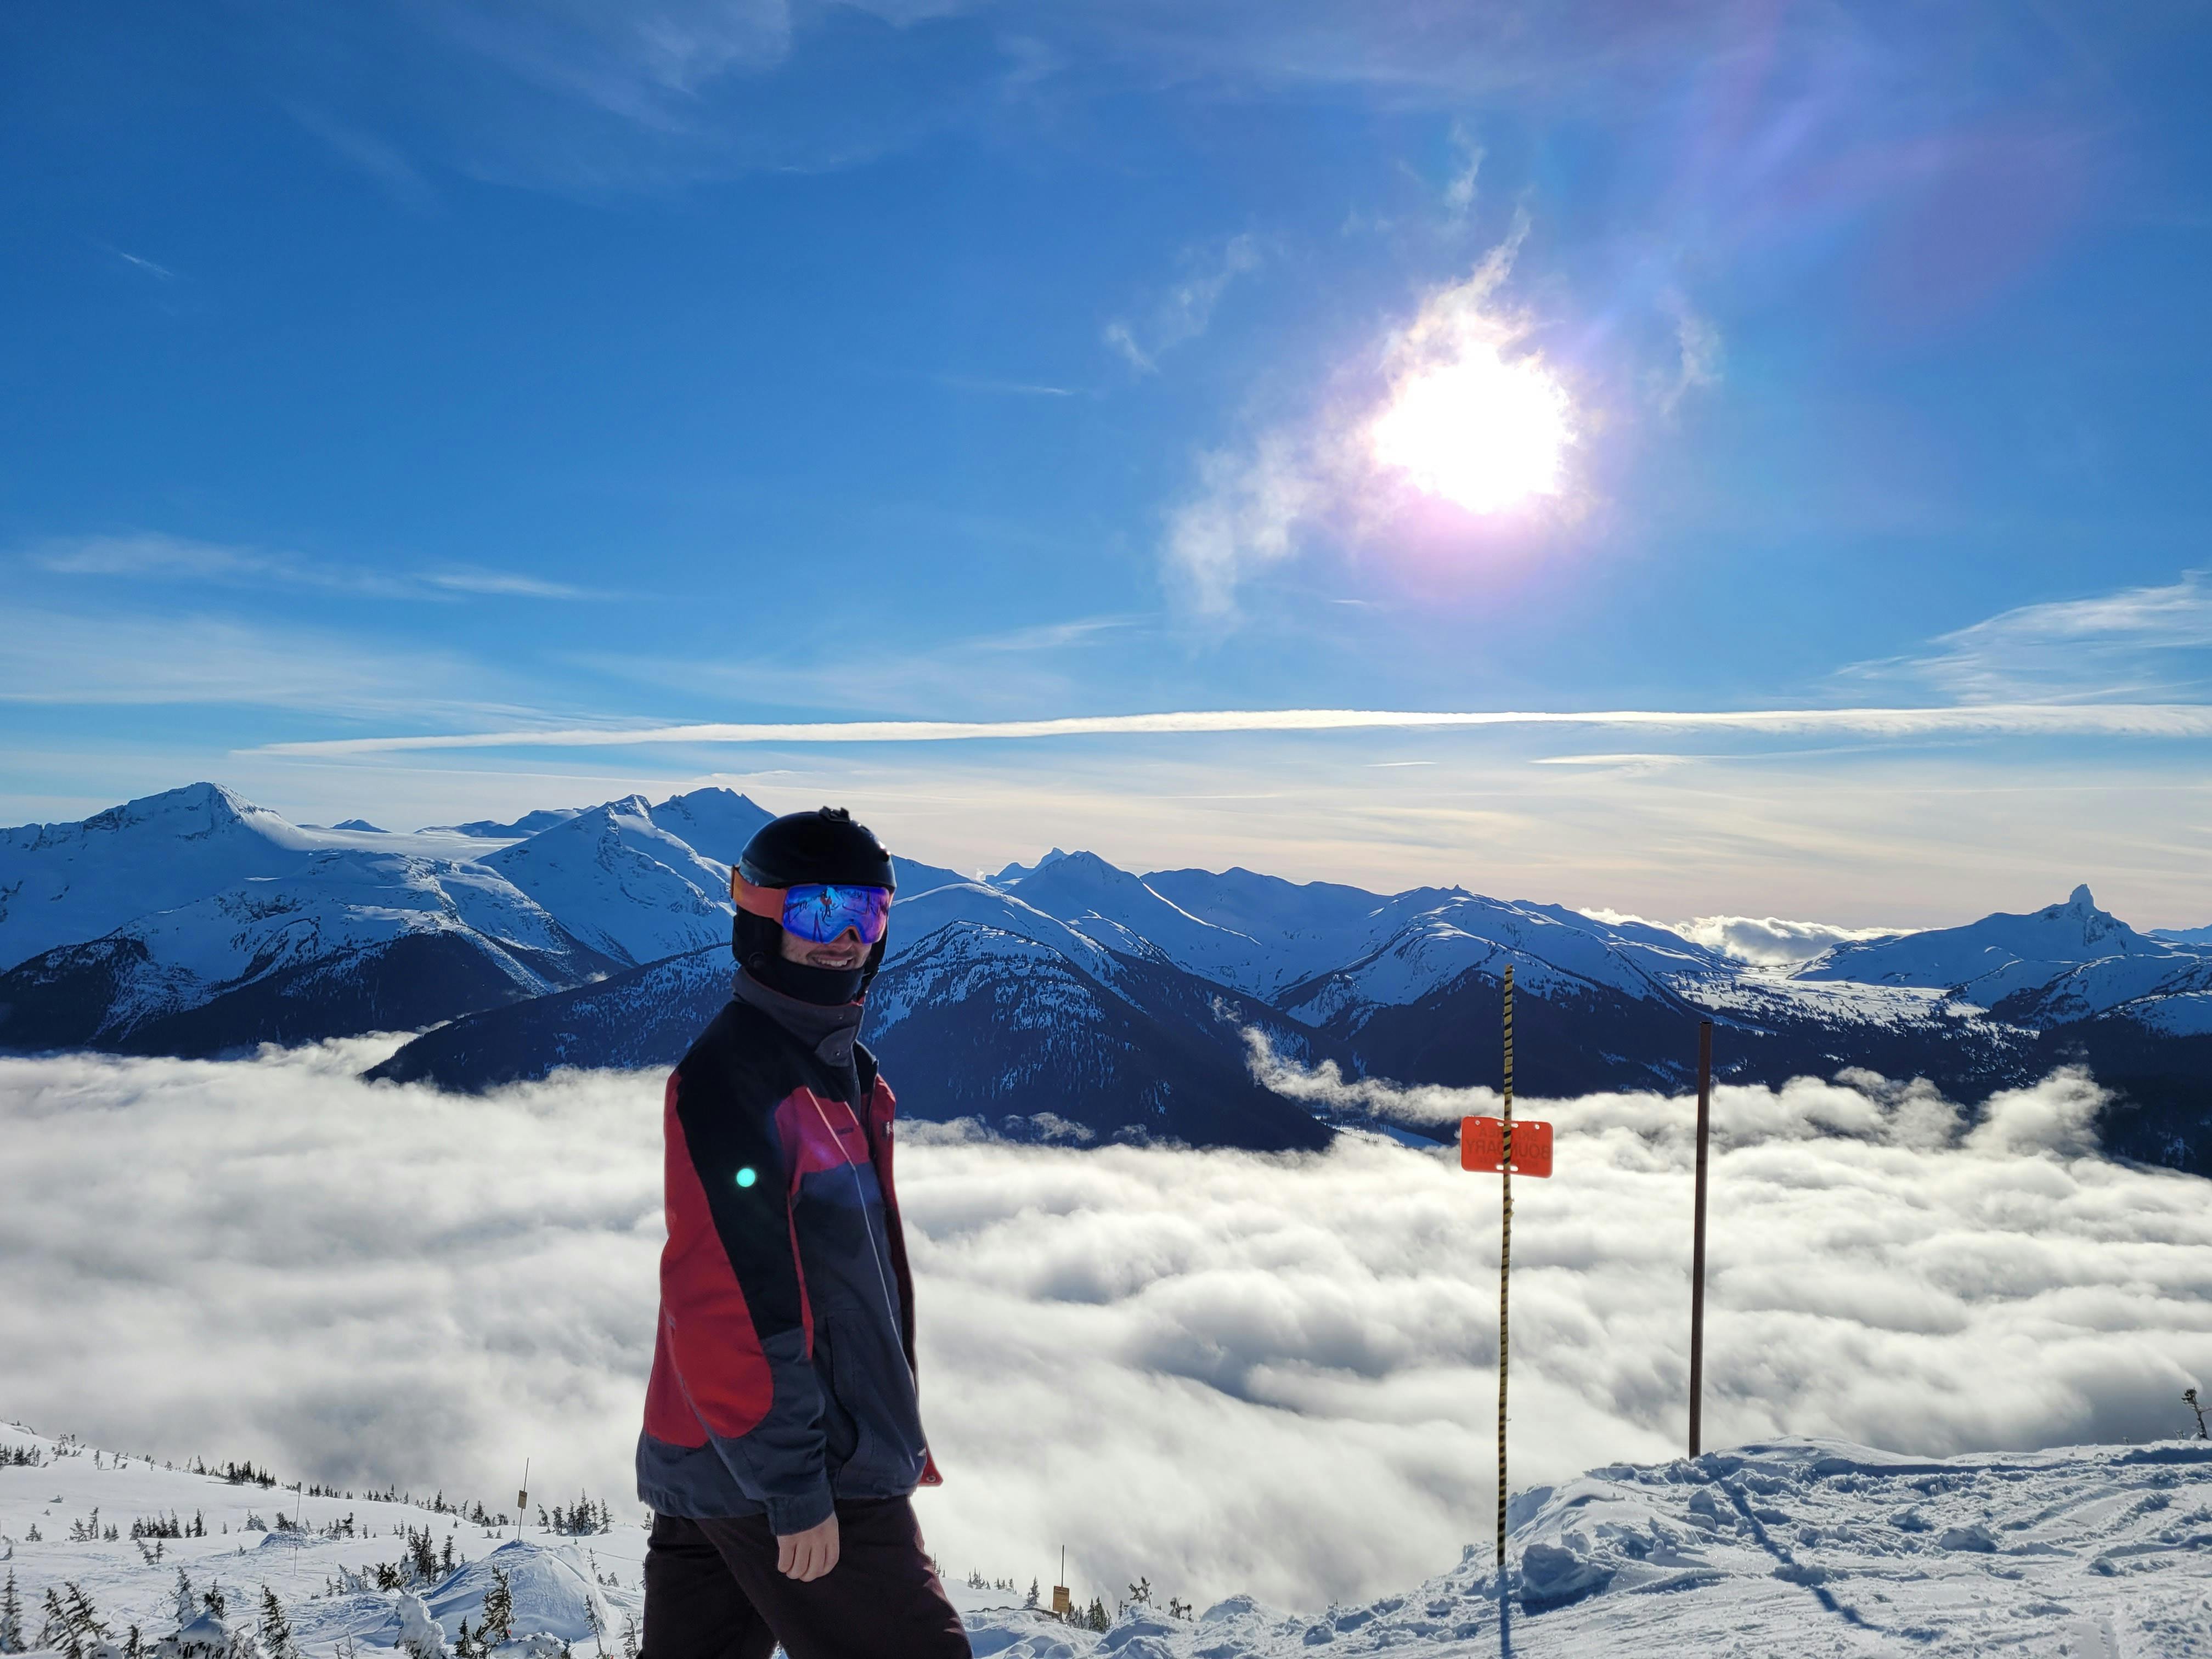 A skier at the top of a snowy peak with clouds and snowy mountains in the background. 